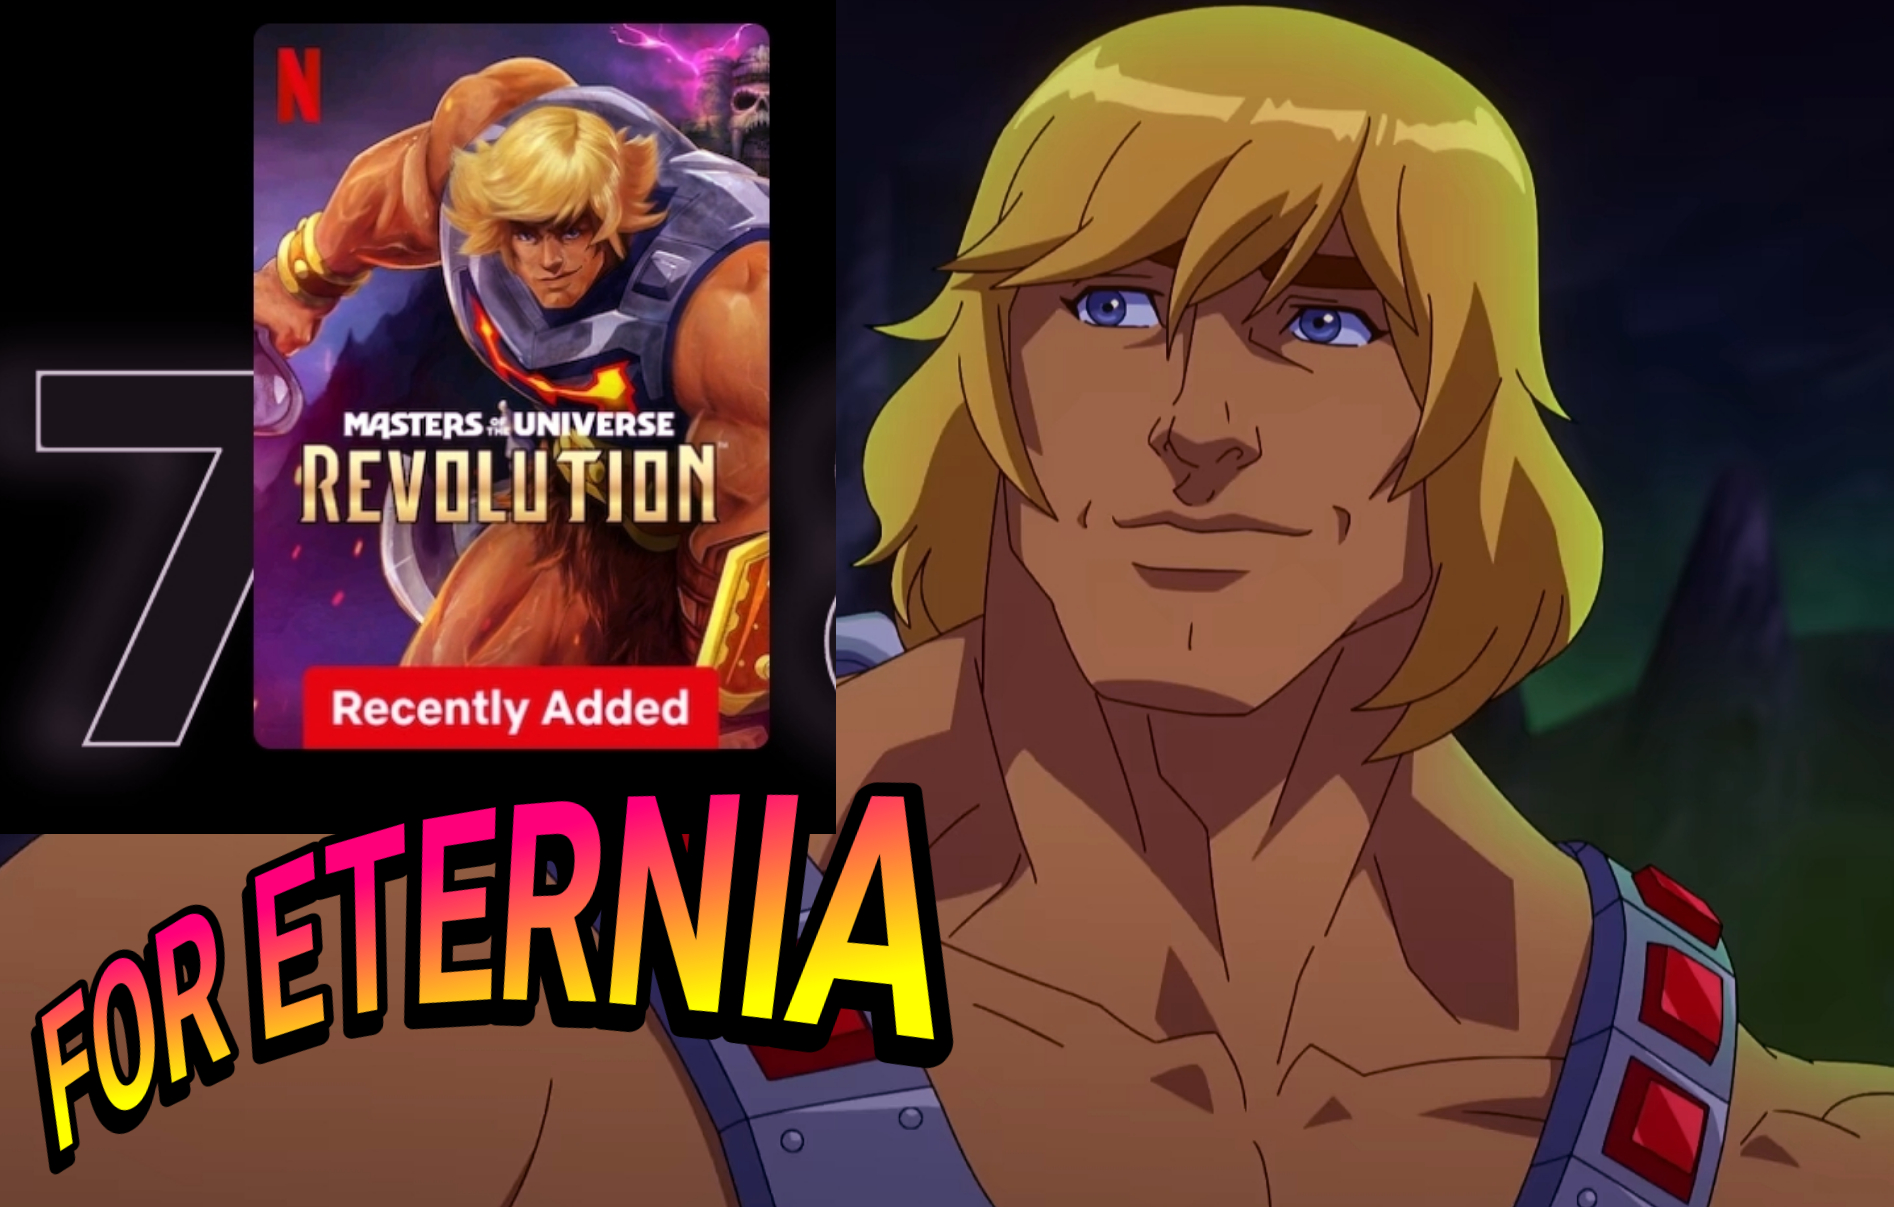 By the Power of Grayskull! ”Masters of the Universe: Revolution” ranks on Netflix’s Top 10 U.S. TV Shows three days in a row